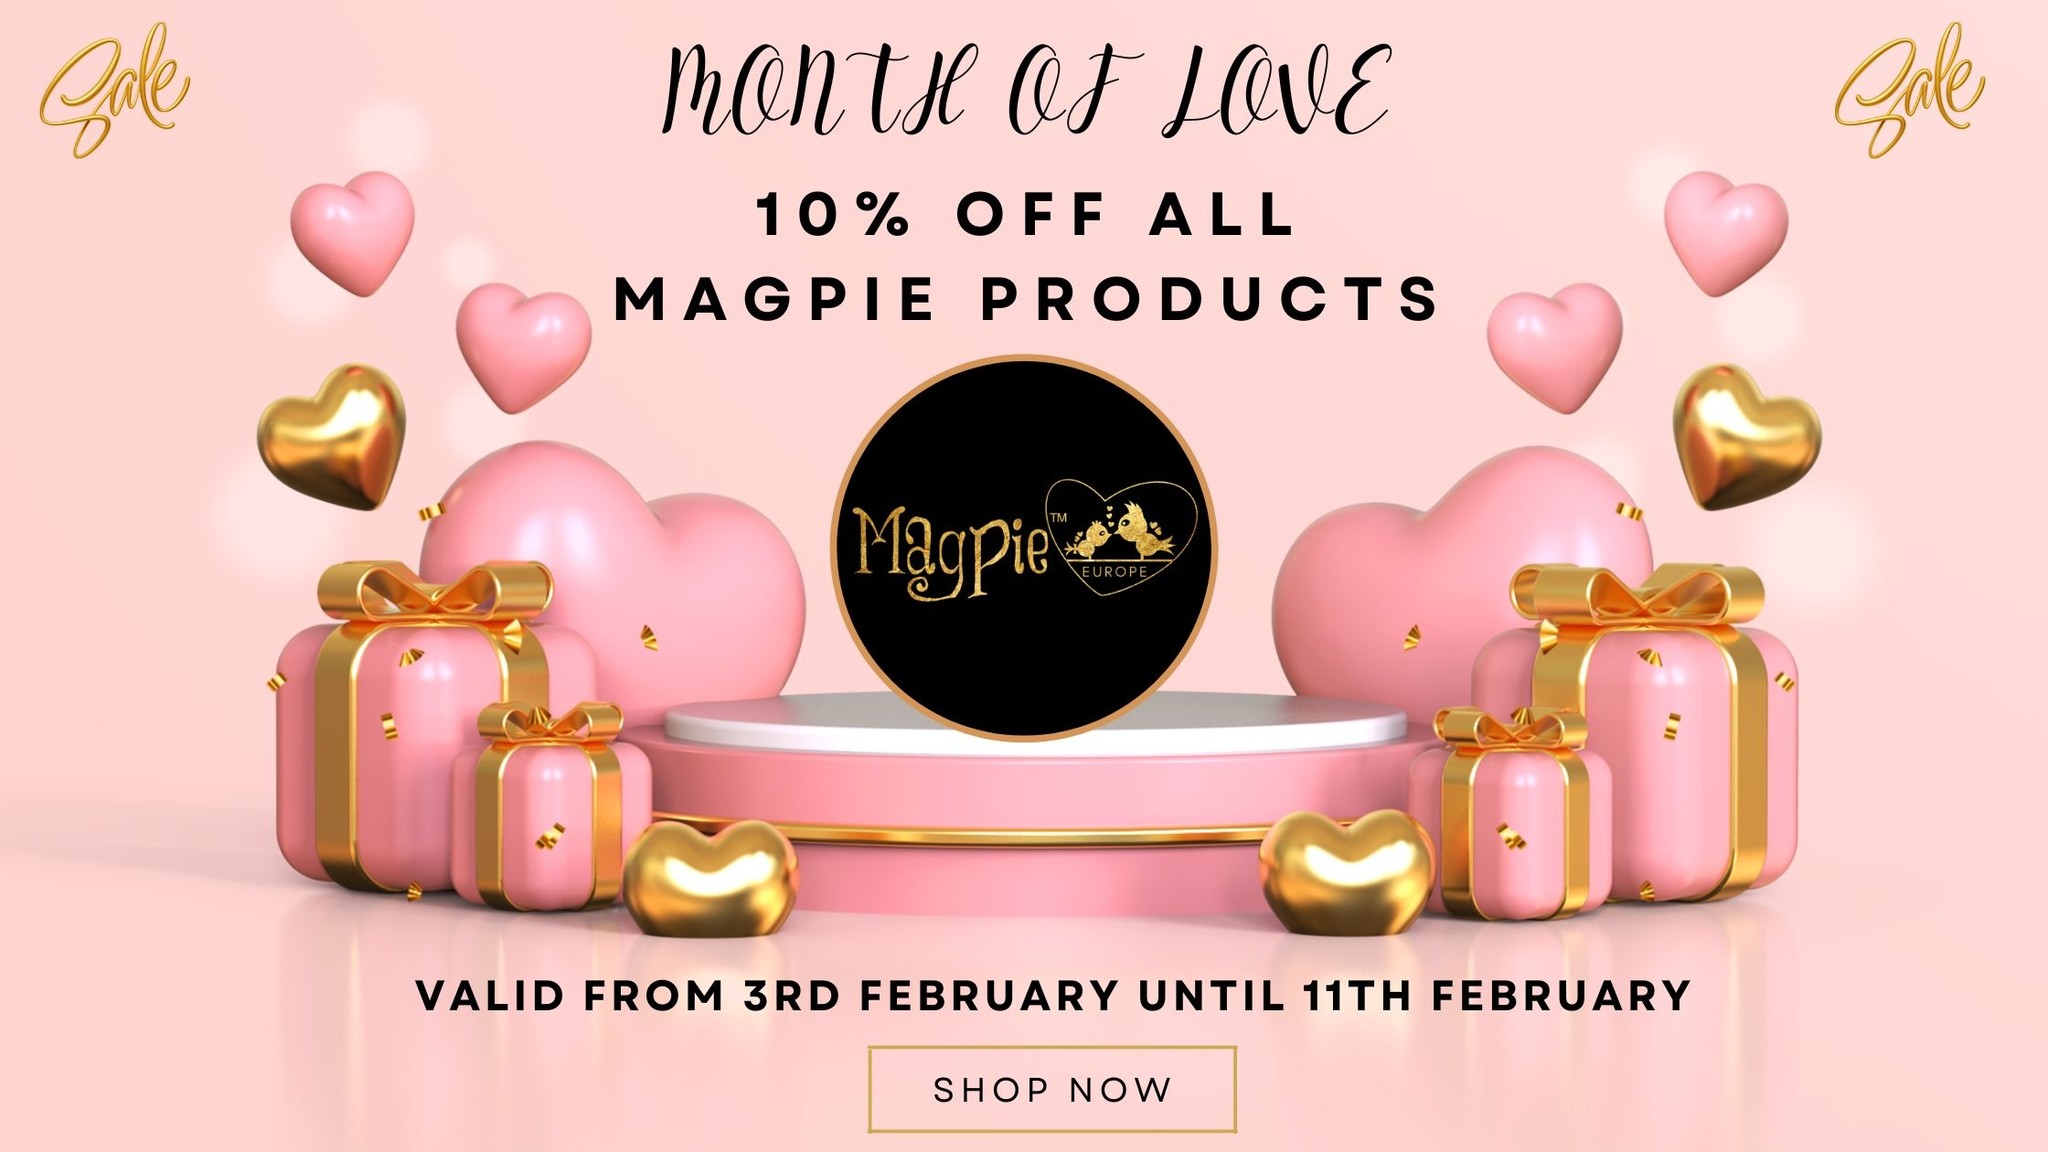 10% OFF ALL MAGPIE PRODUCTS